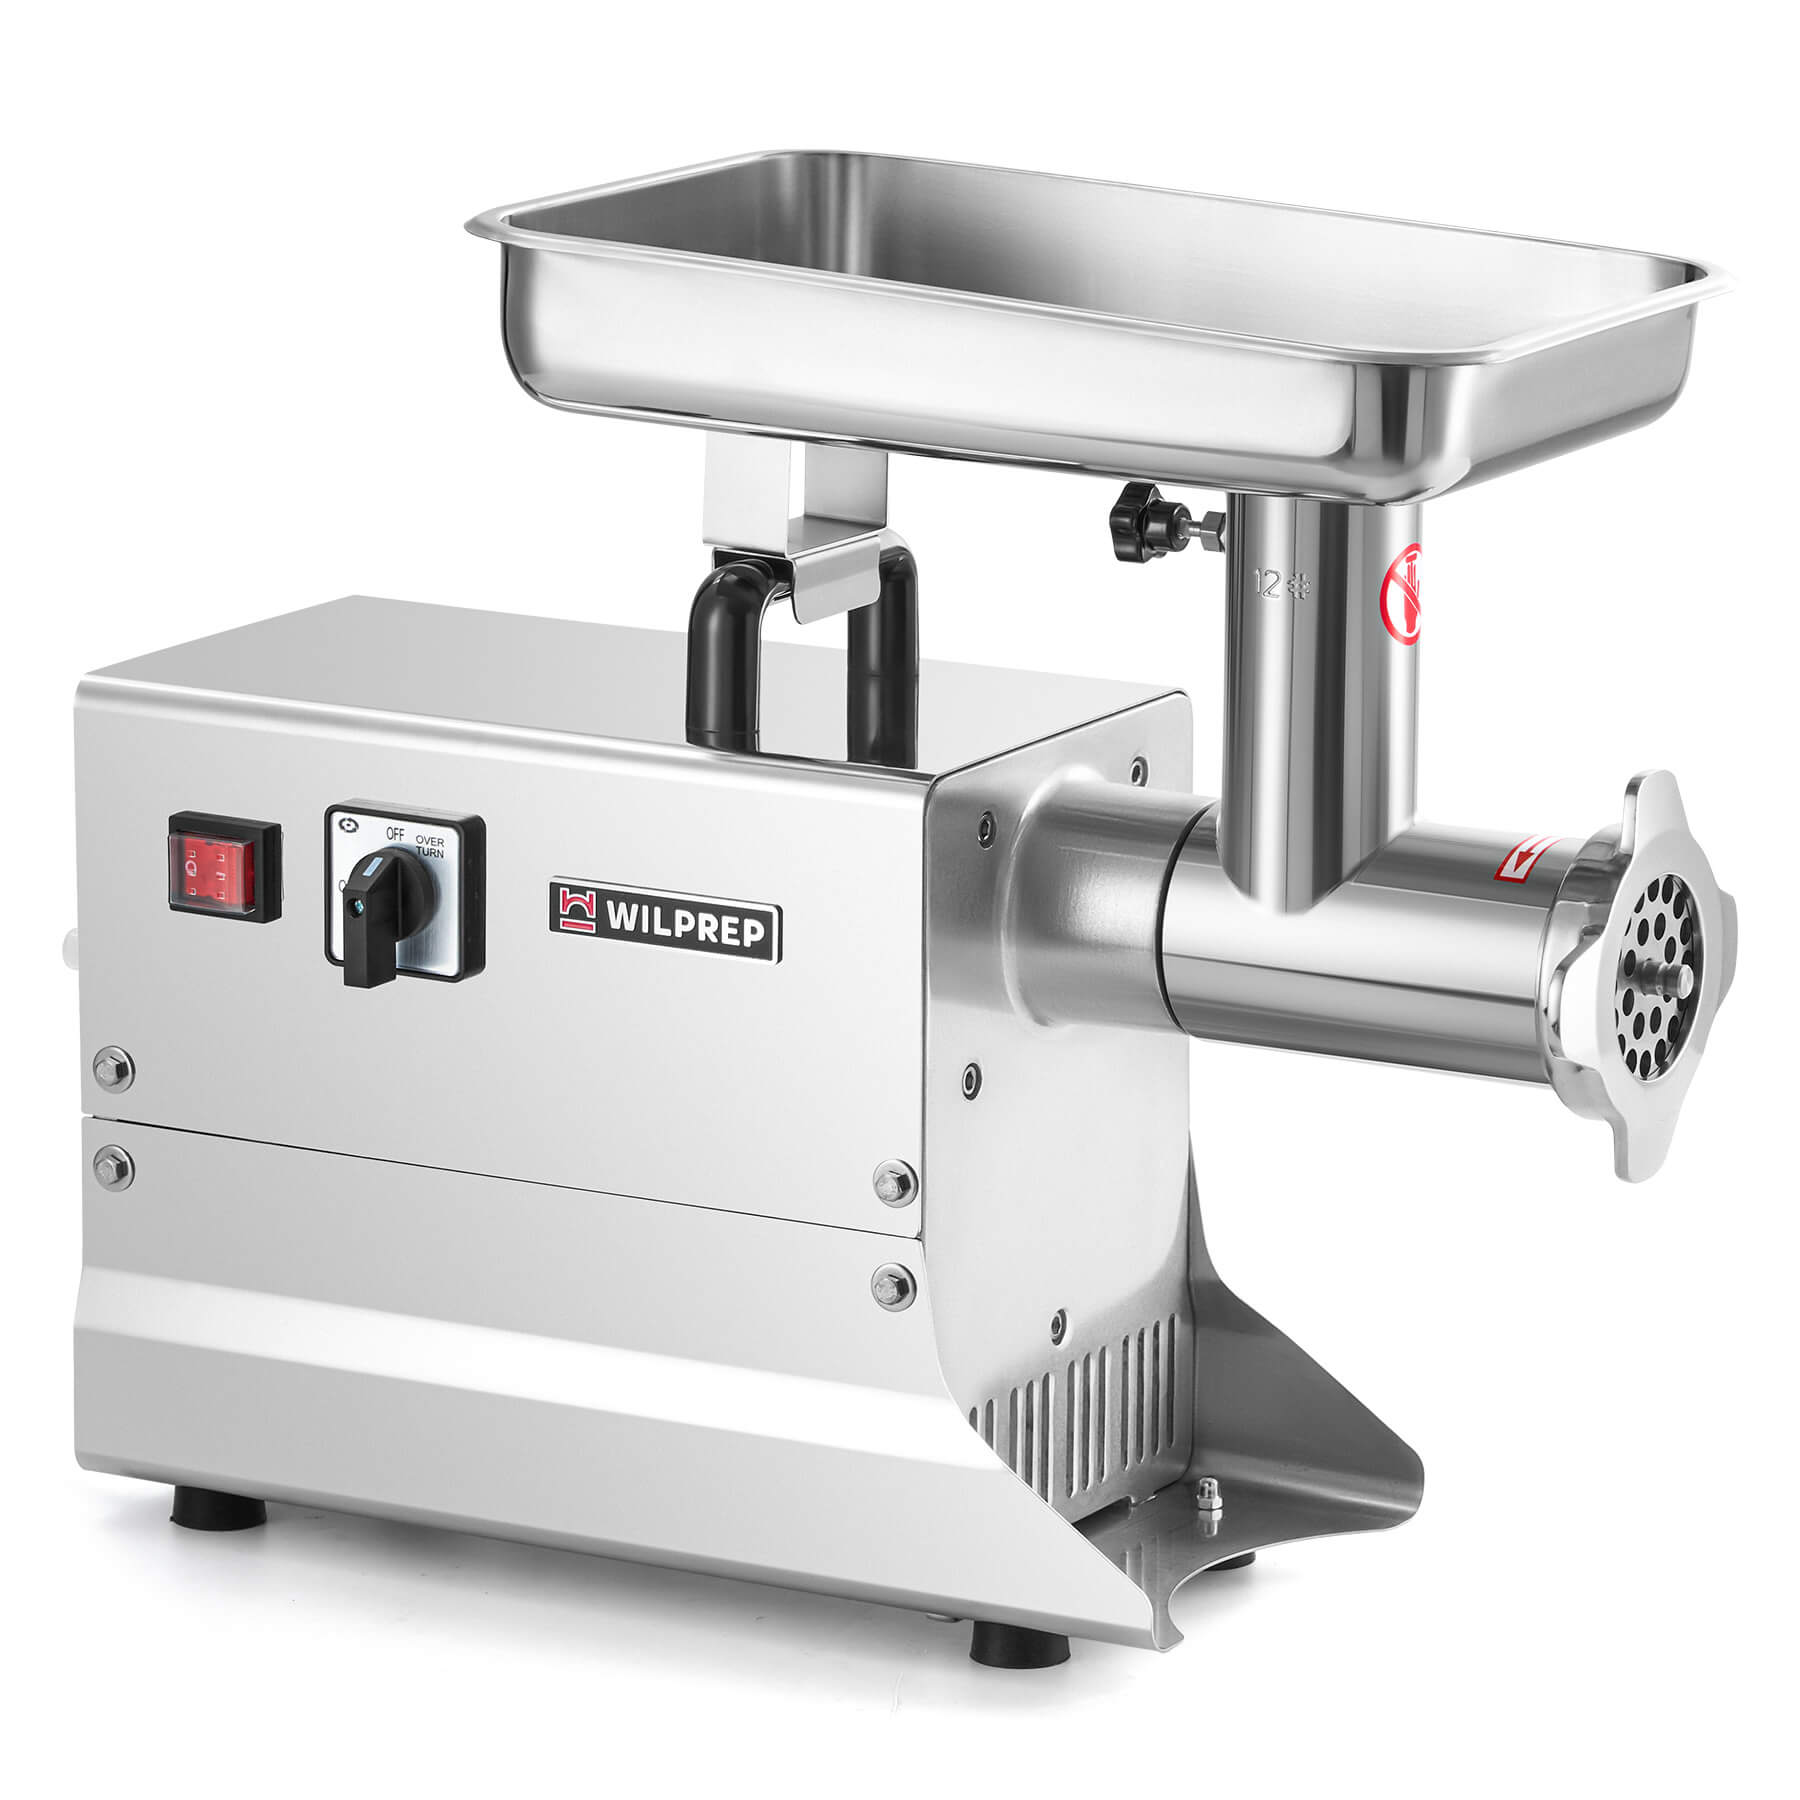 550W Electric Meat Grinder with Reverse Function ETL Approved-110V,3/4hp